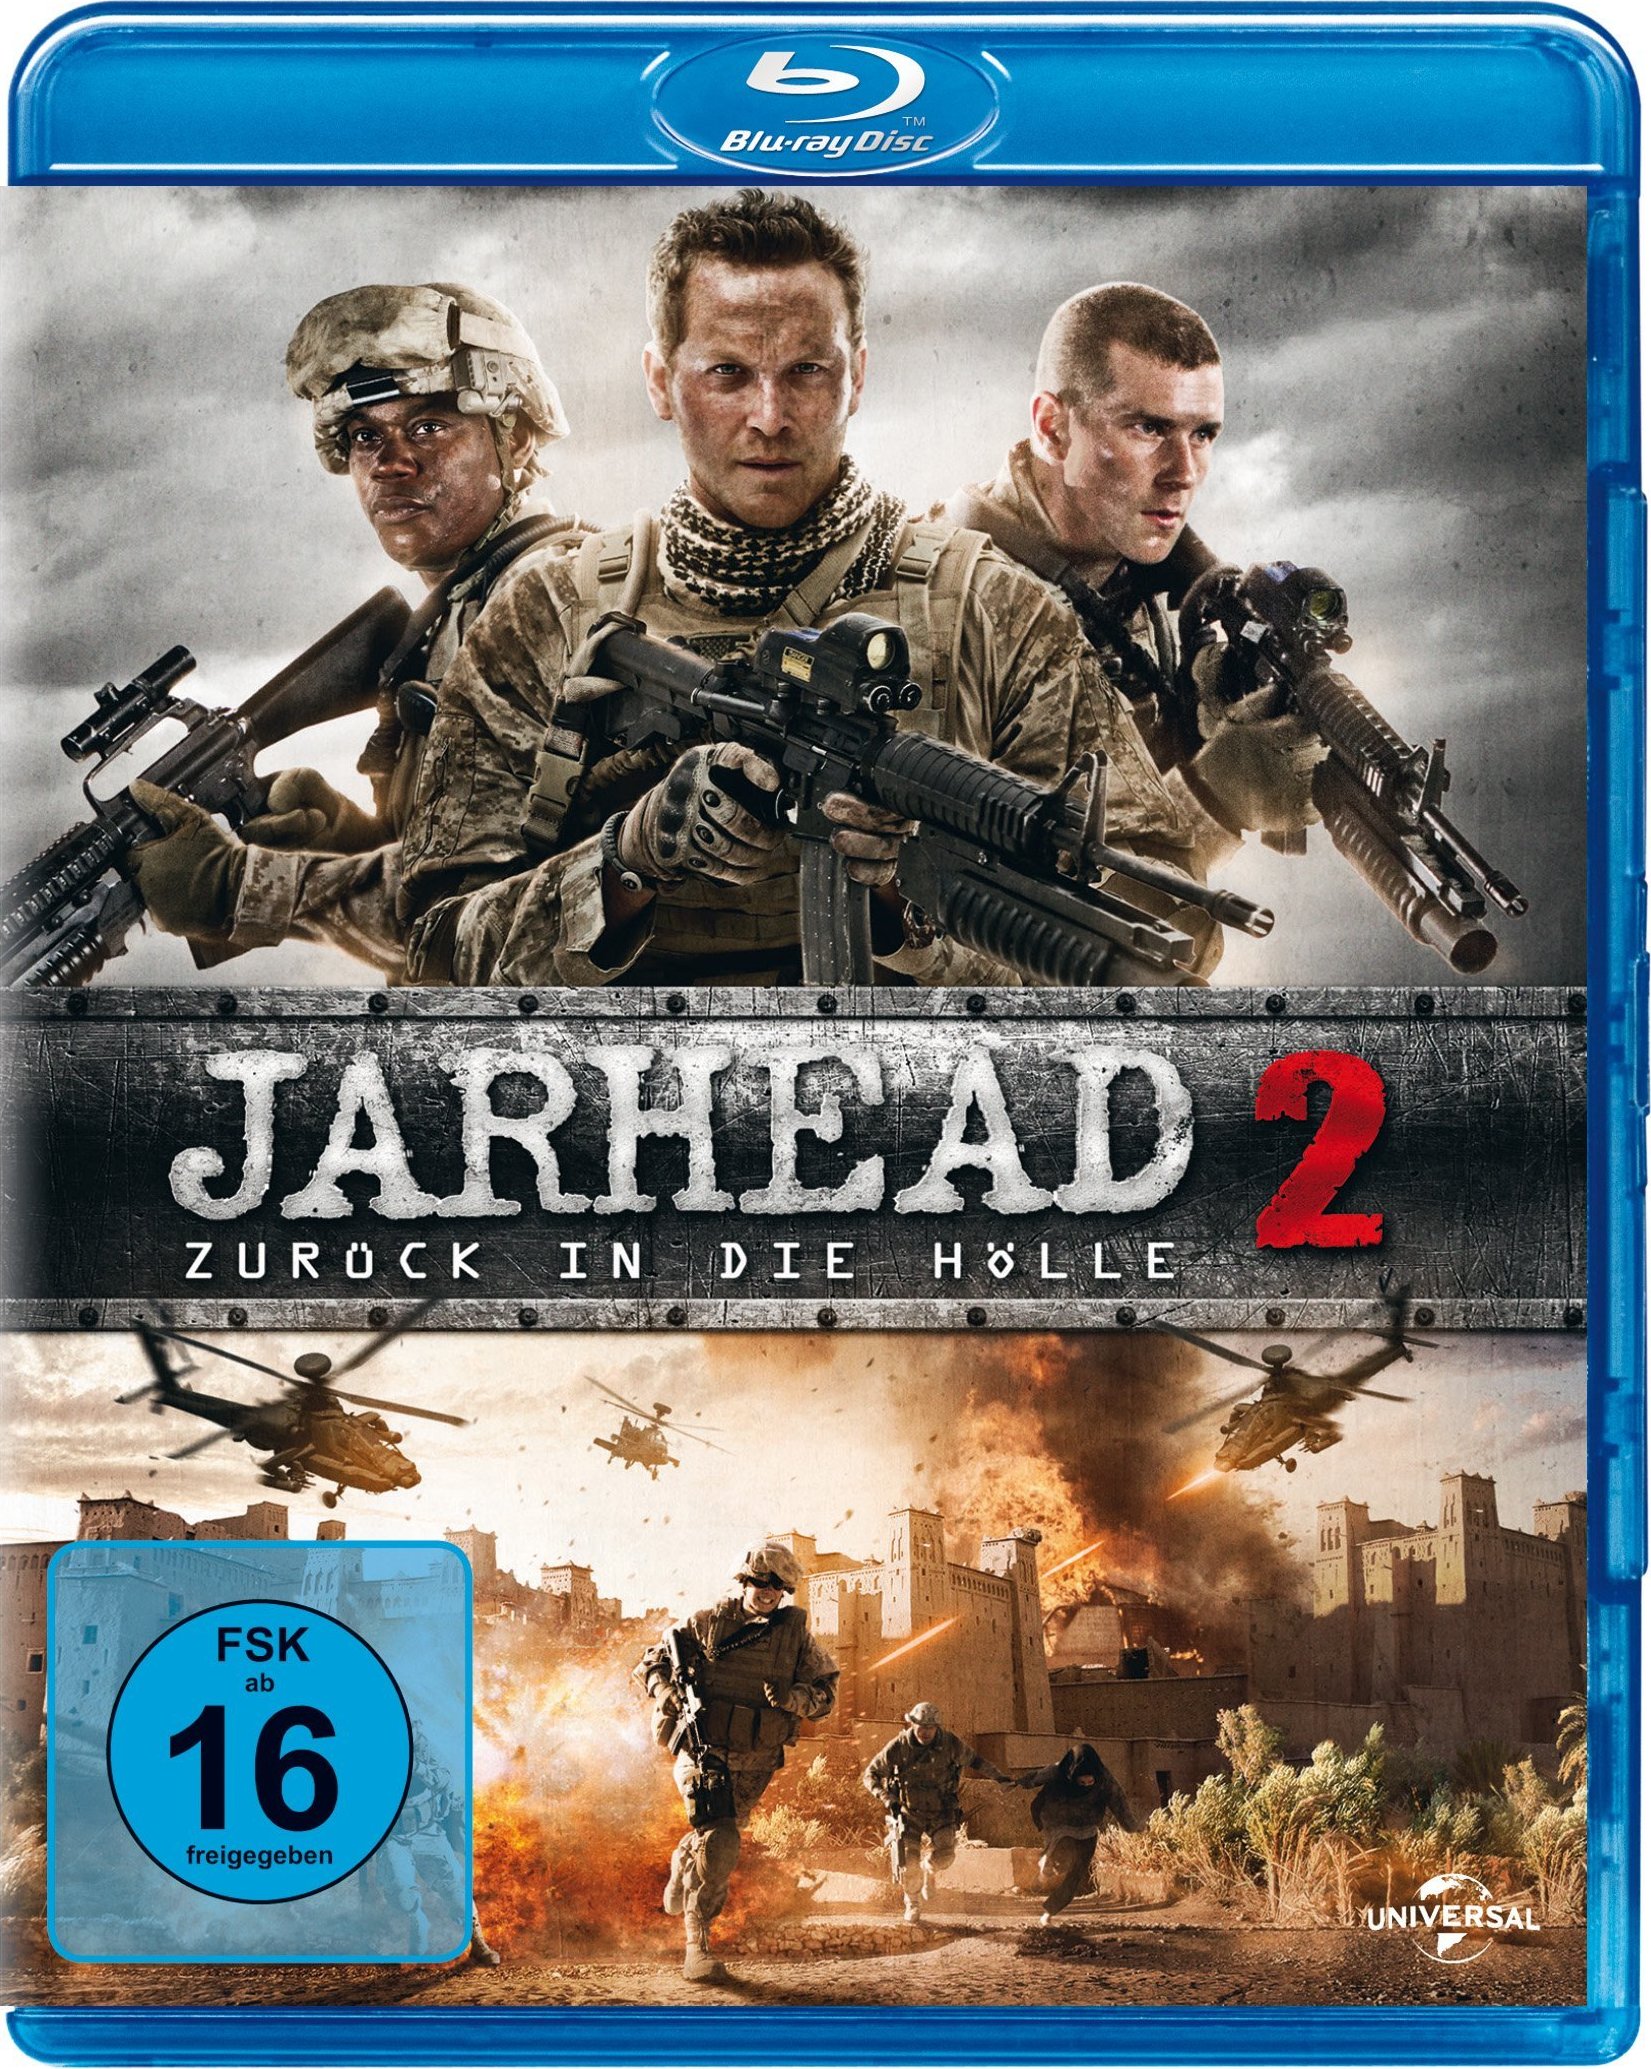 Amazing Jarhead 2: Field Of Fire Pictures & Backgrounds